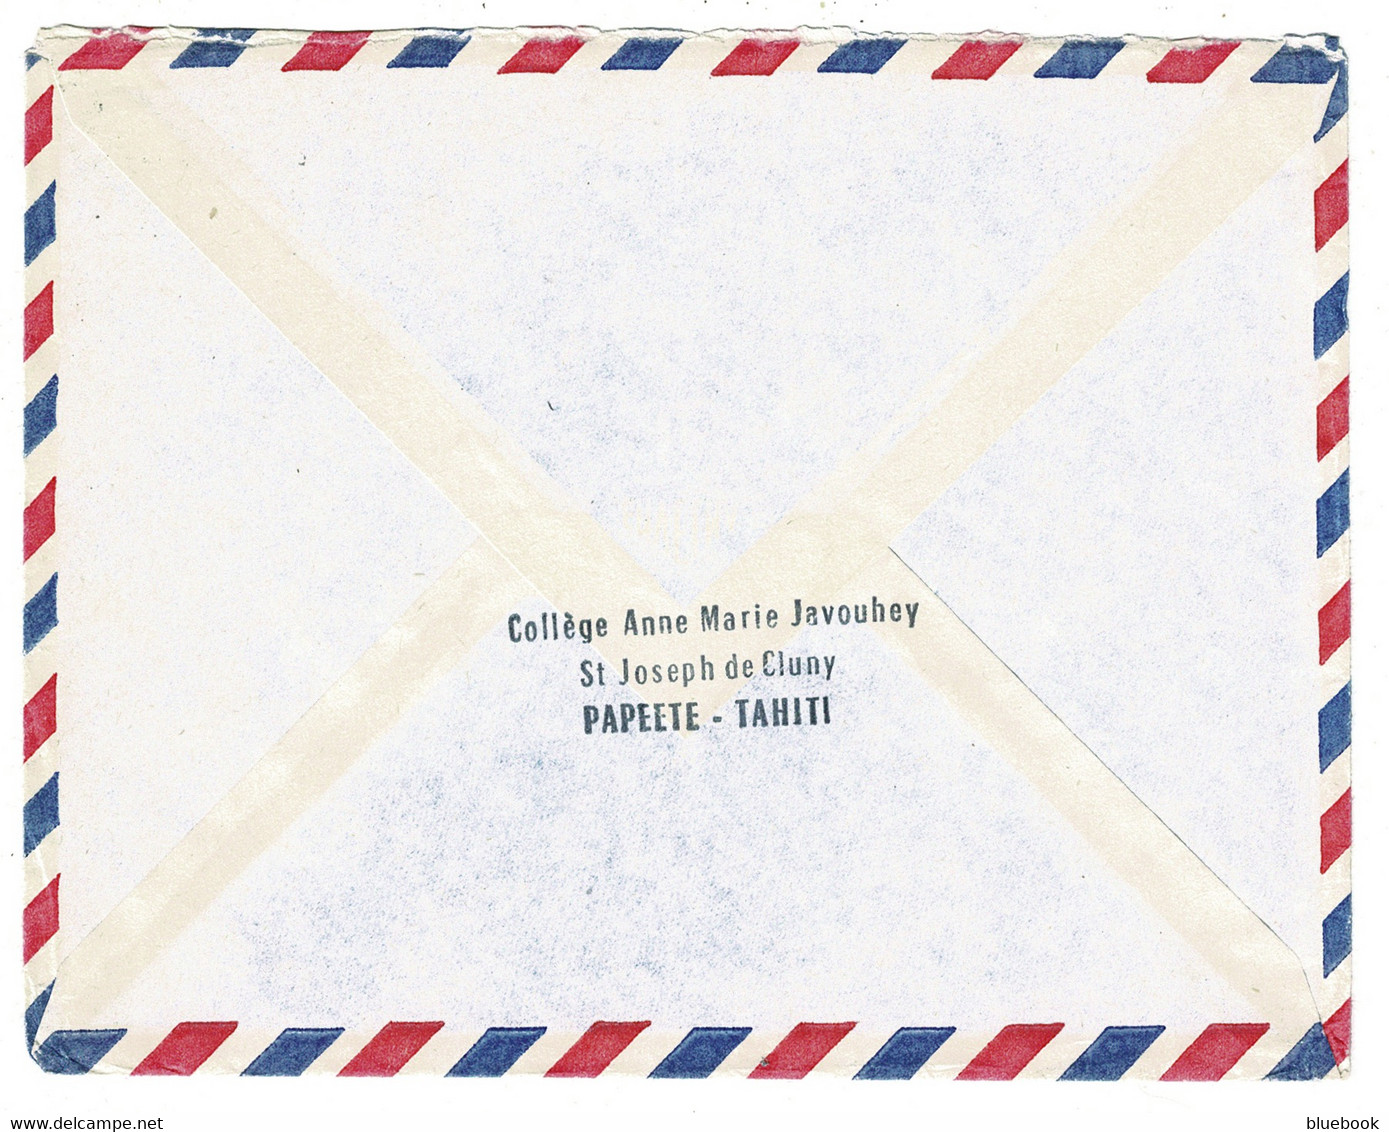 Ref 1546 - 1962 Airmail Cover Tahiti French Polynesia 37f To Paris France - Stamps Cat £20 - Tahití